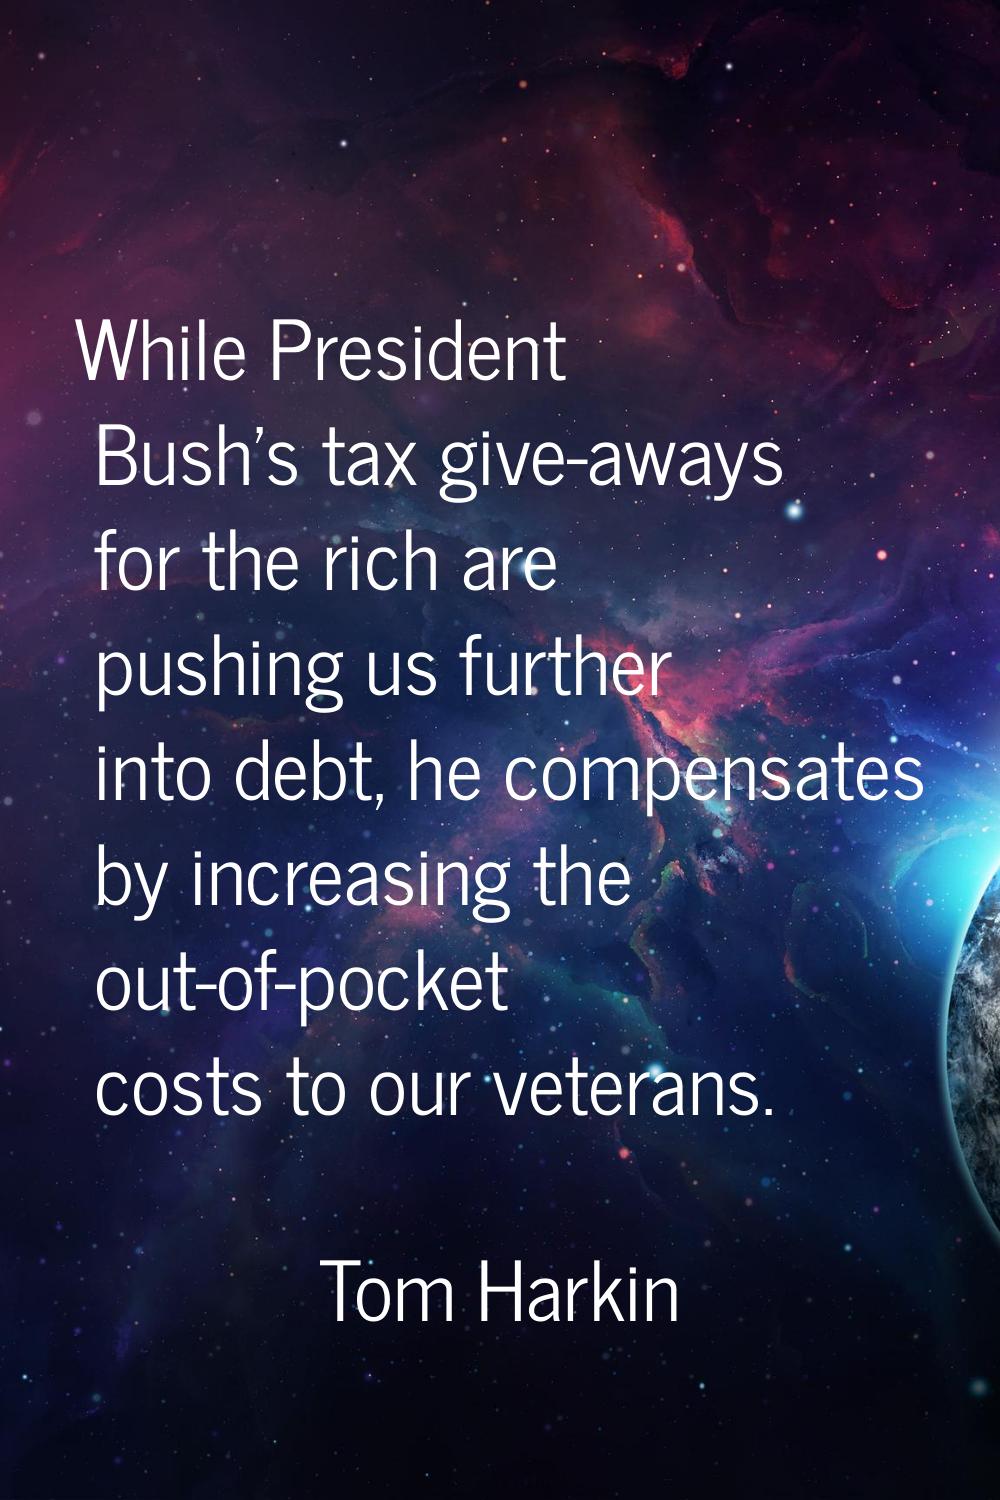 While President Bush's tax give-aways for the rich are pushing us further into debt, he compensates